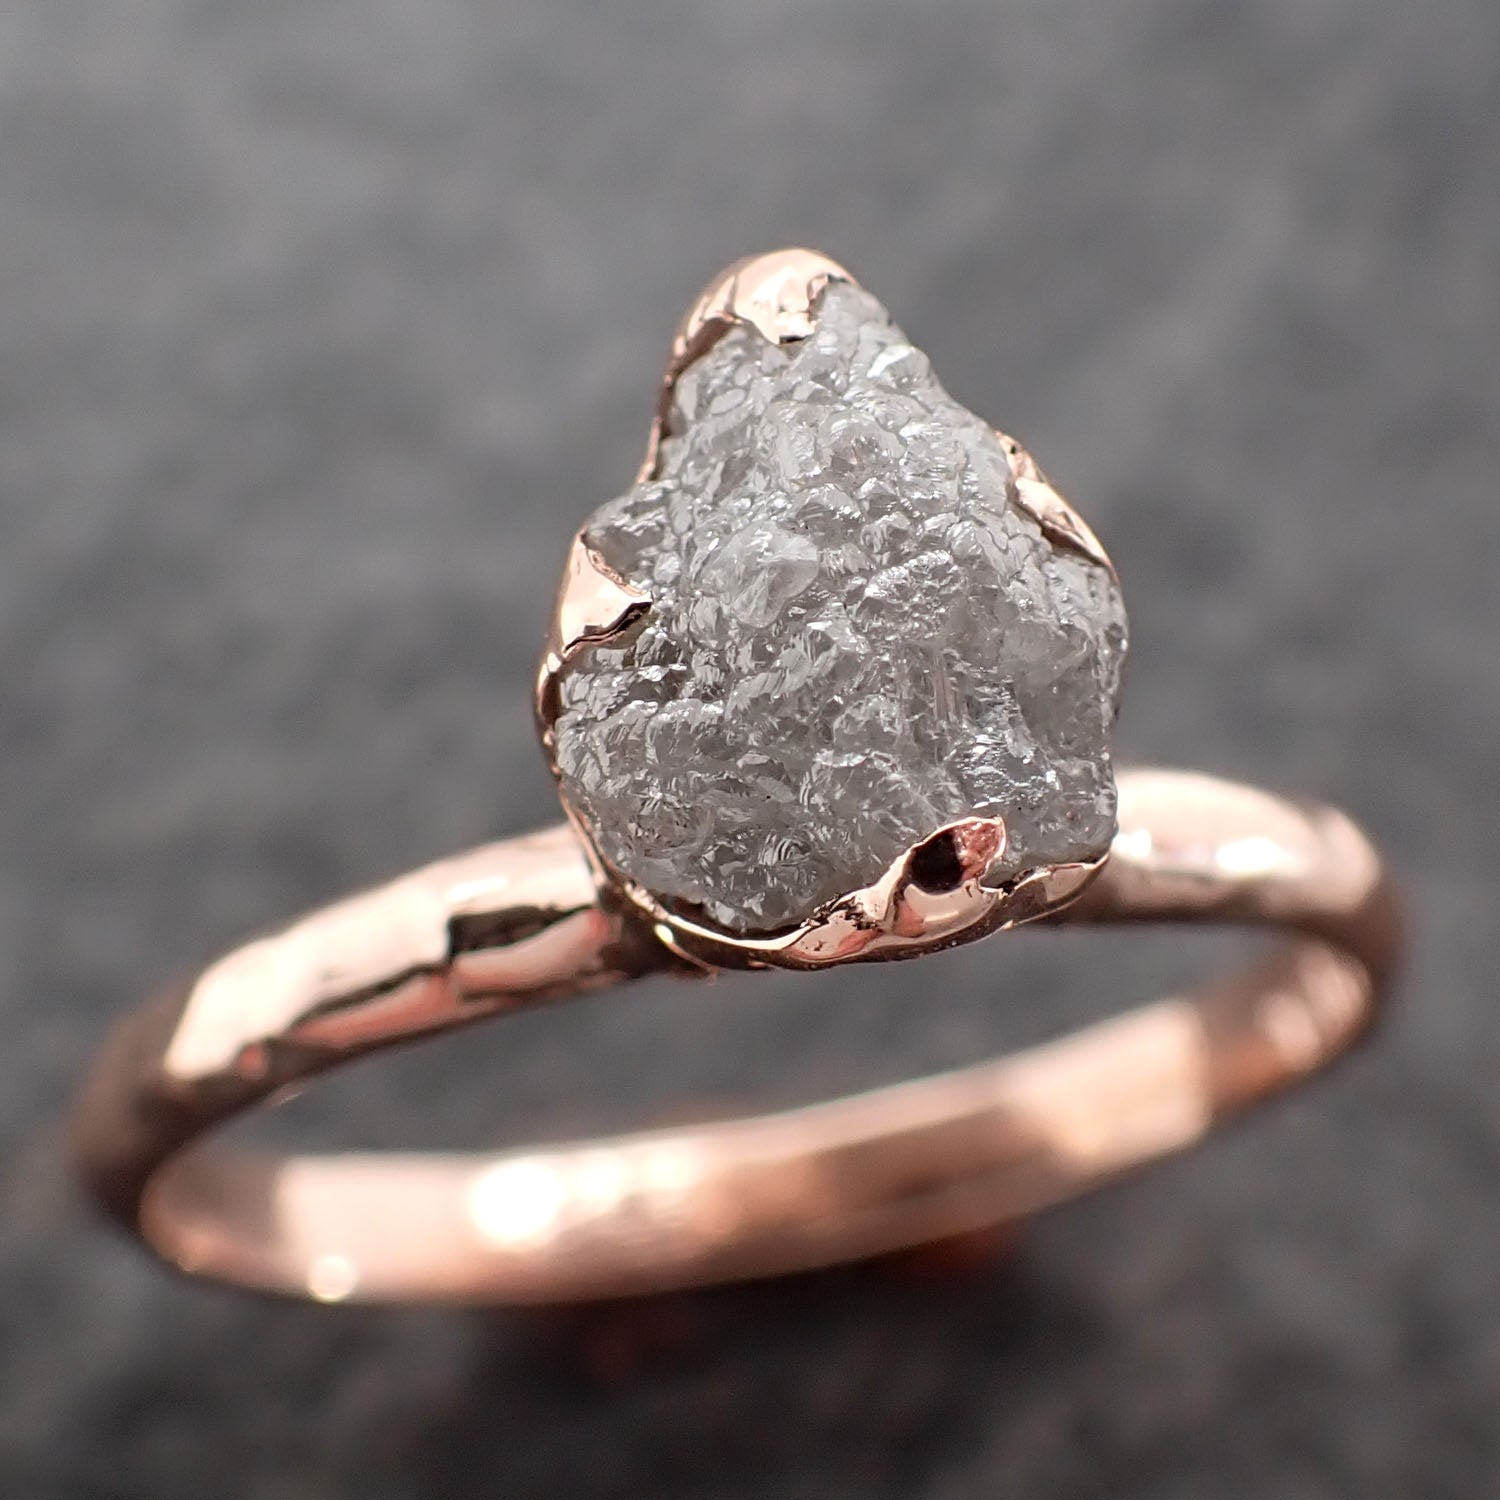 raw rough uncut diamond engagement ring rough diamond solitaire recycled 14k rose gold conflict free diamond wedding promise byangeline 2707 Alternative Engagement